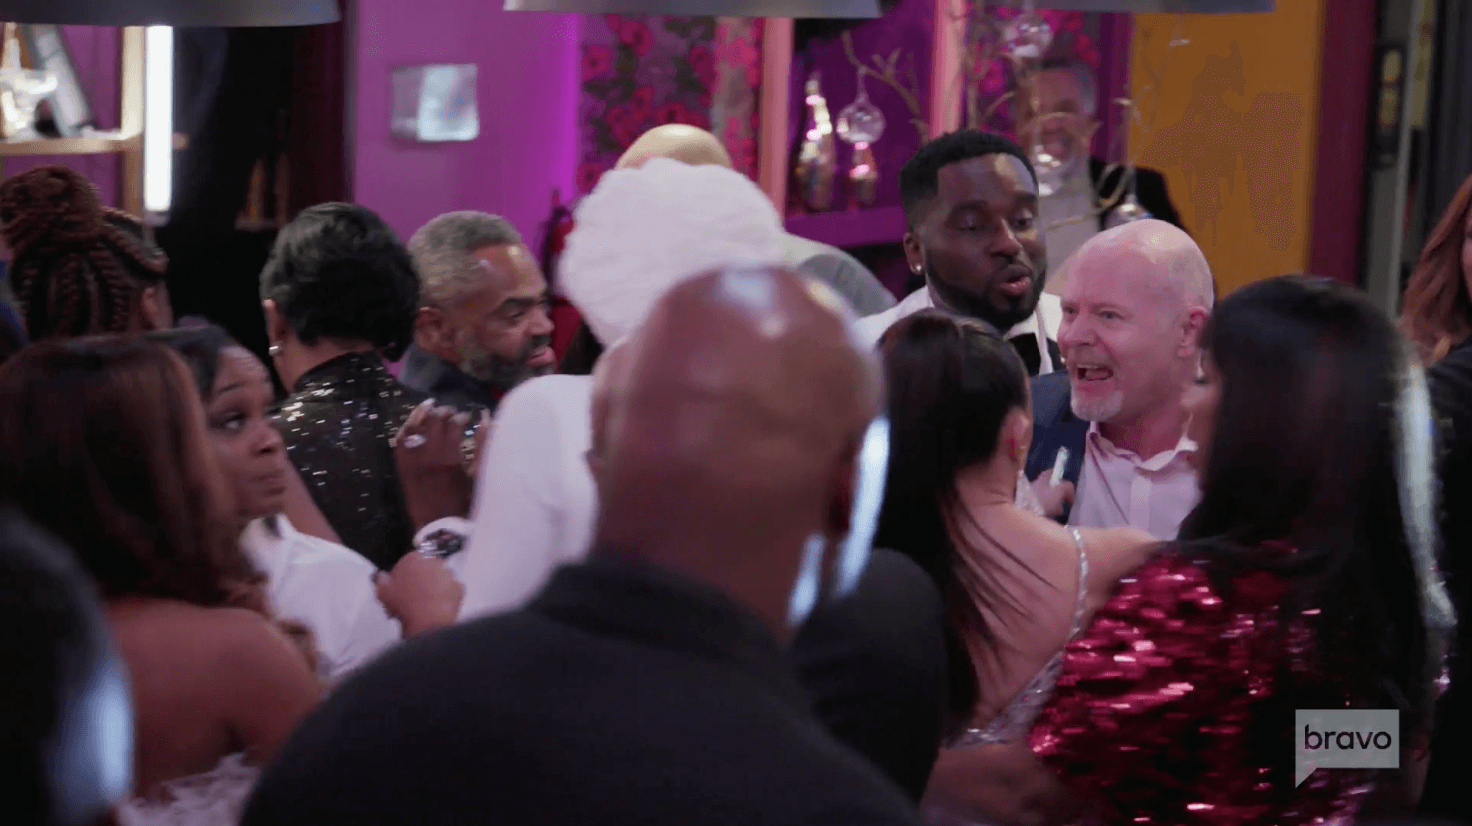 ‘RHOP’ RECAP: Juan Proposes To Robyn & Michael Darby and Chris Bassett Square Off!